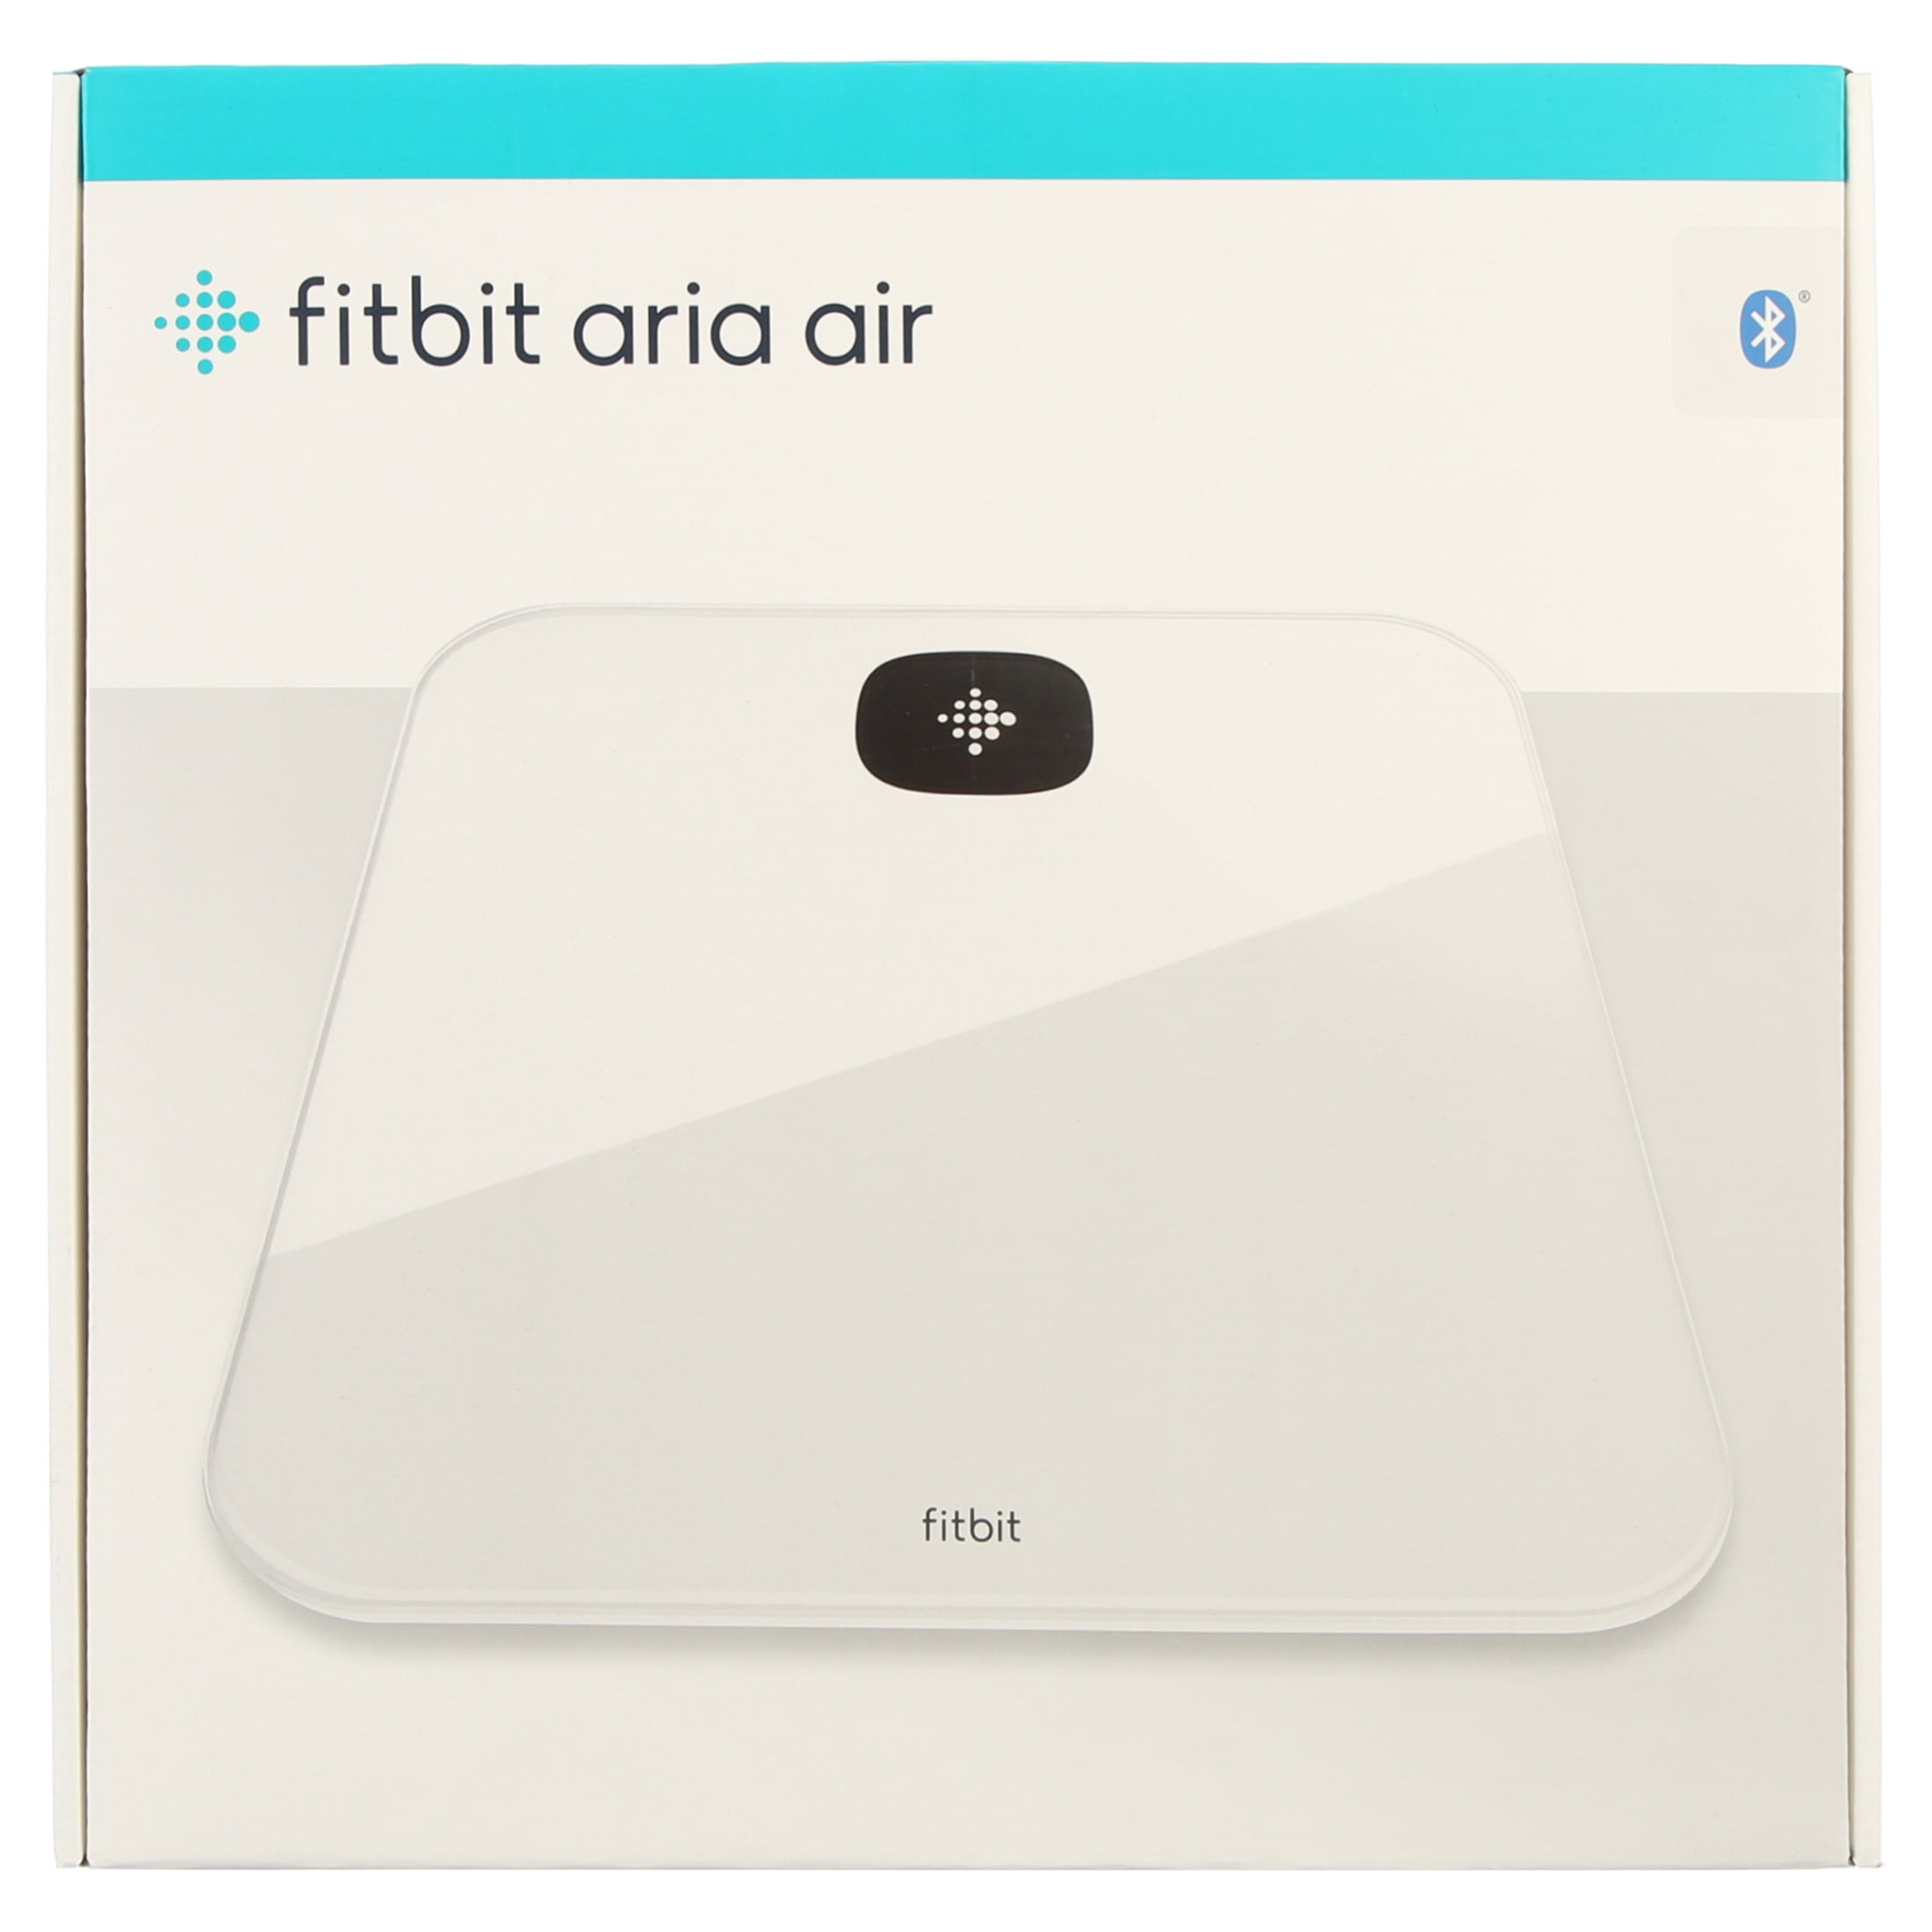 The Fitbit Aria Air scale makes it a cinch to track your health